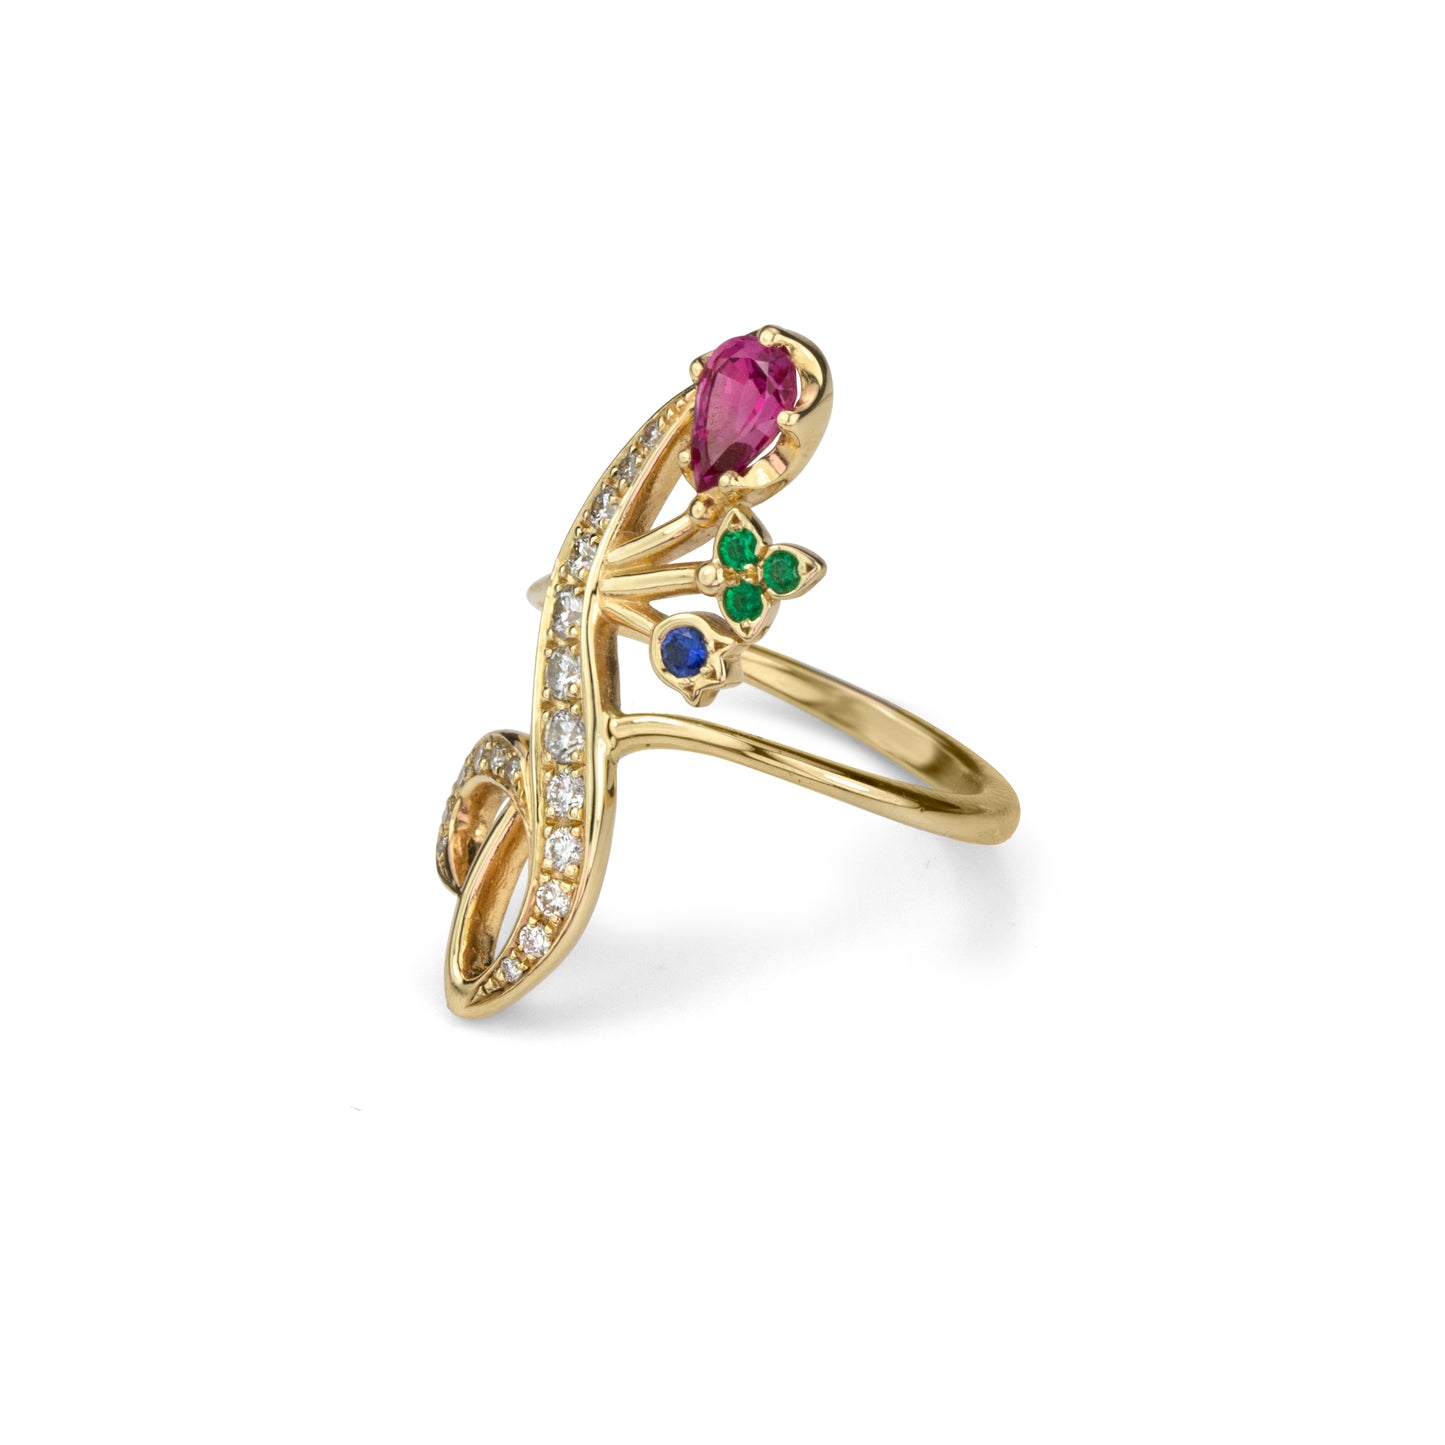 Fancy yellow gold and gemstone giardinetti style  ring with curving diamond set leaf design and multi gem pink sapphire, emerald and blue sapphire  flower accents in profile view.